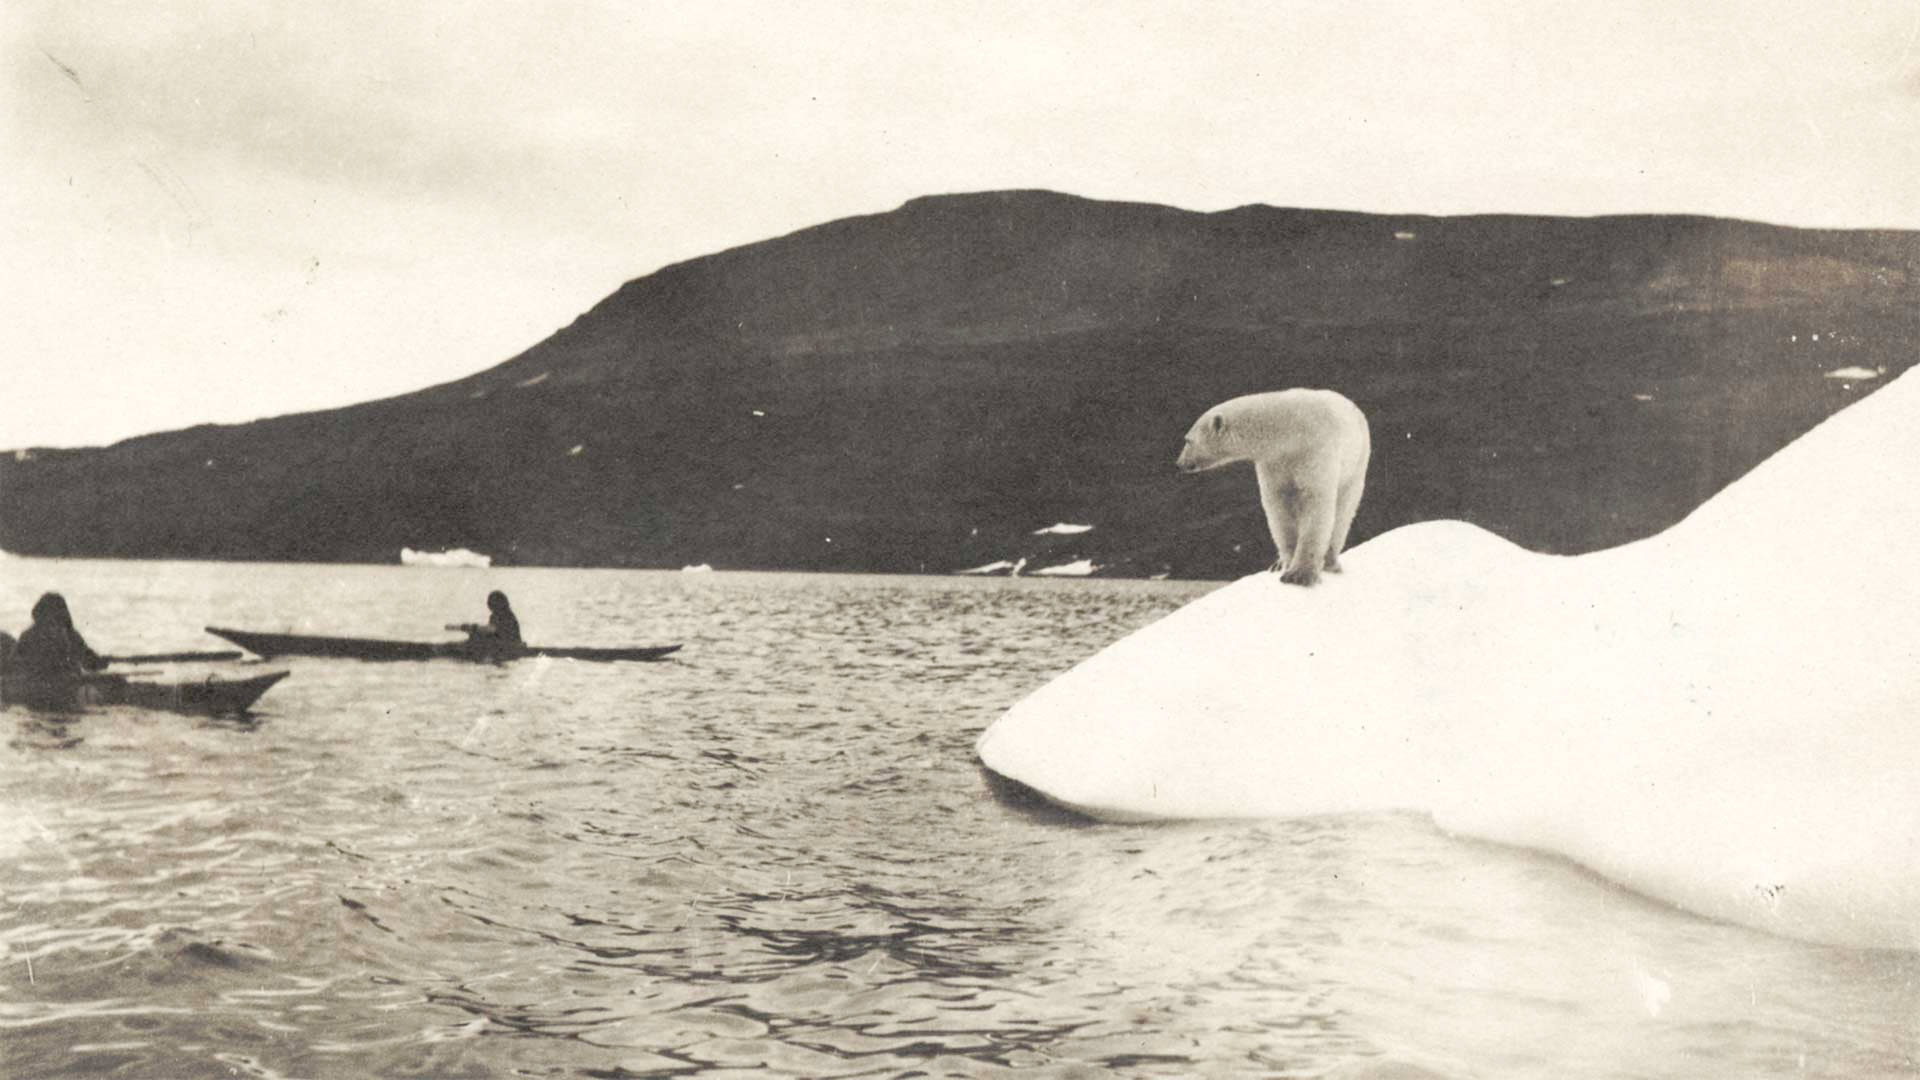 Vintage photo of a polar bear on a piece of ice looking at two people in long canoes